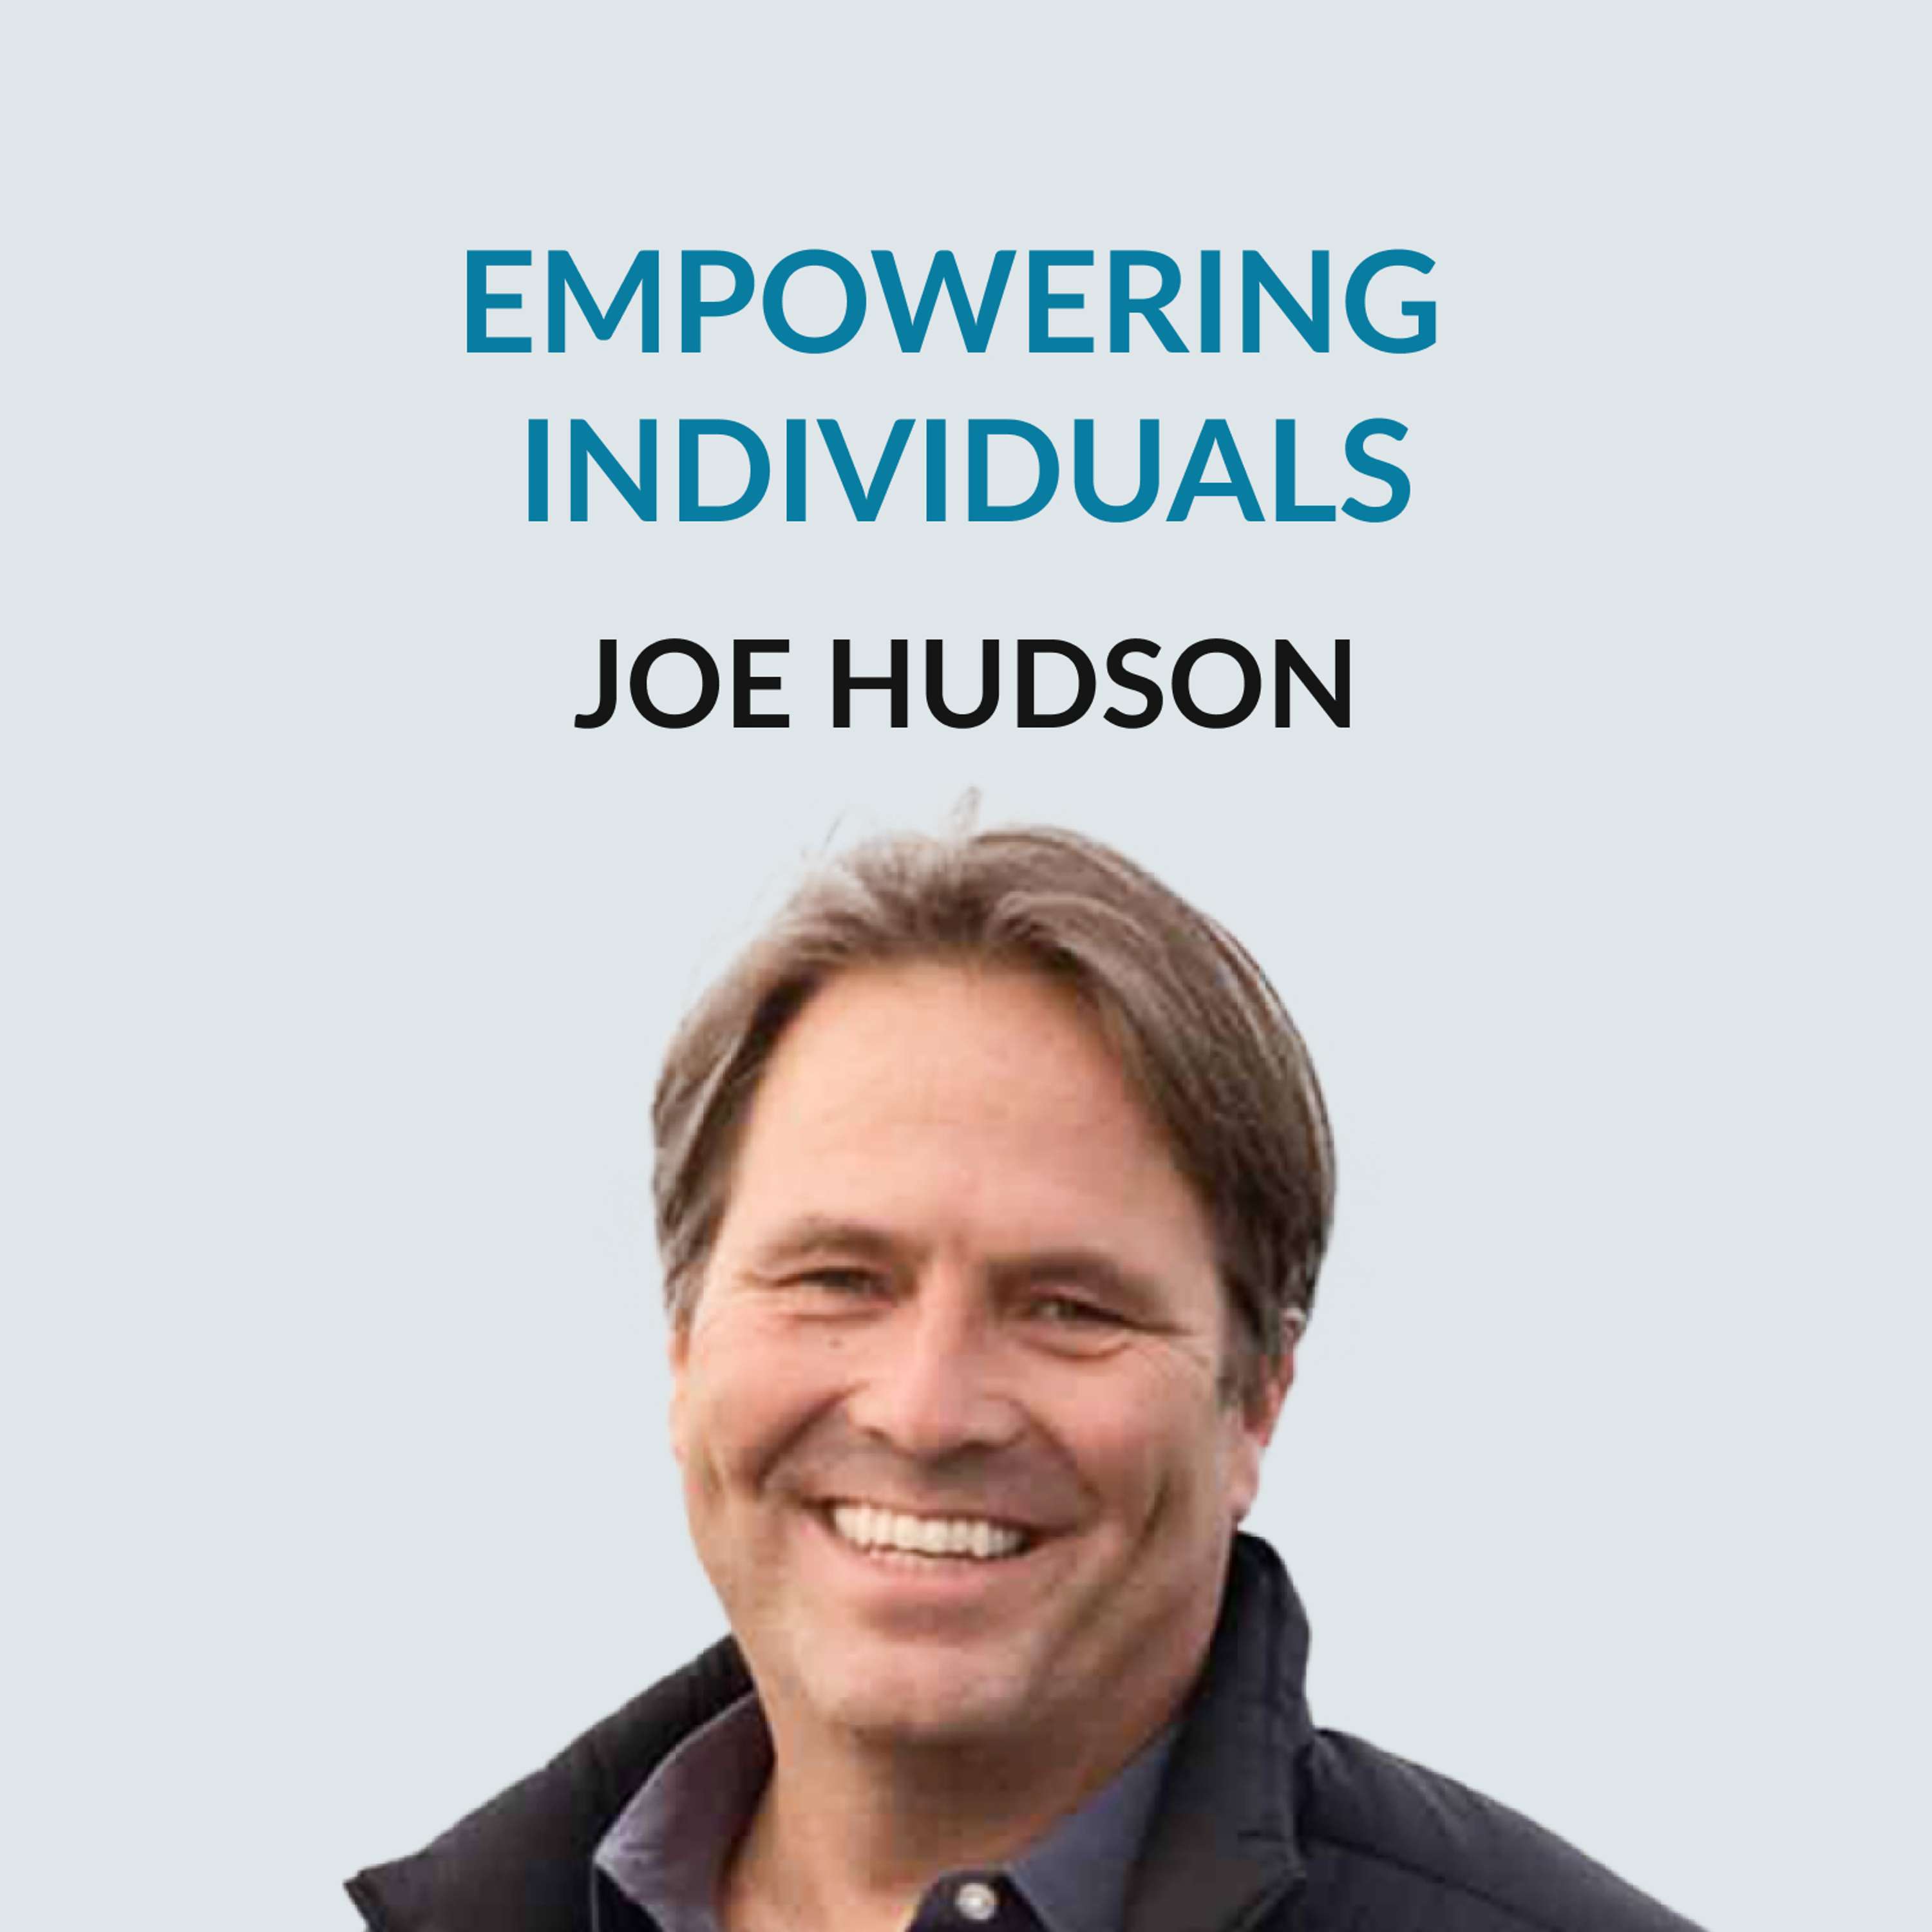 #164 Transformation For High Achievers — Joe Hudson on growing up with an alcoholic father, living around the world, transformation and self-discovery, becoming comfortable with yourself, emotional fluidity, expressing emotions, and the art of parenting